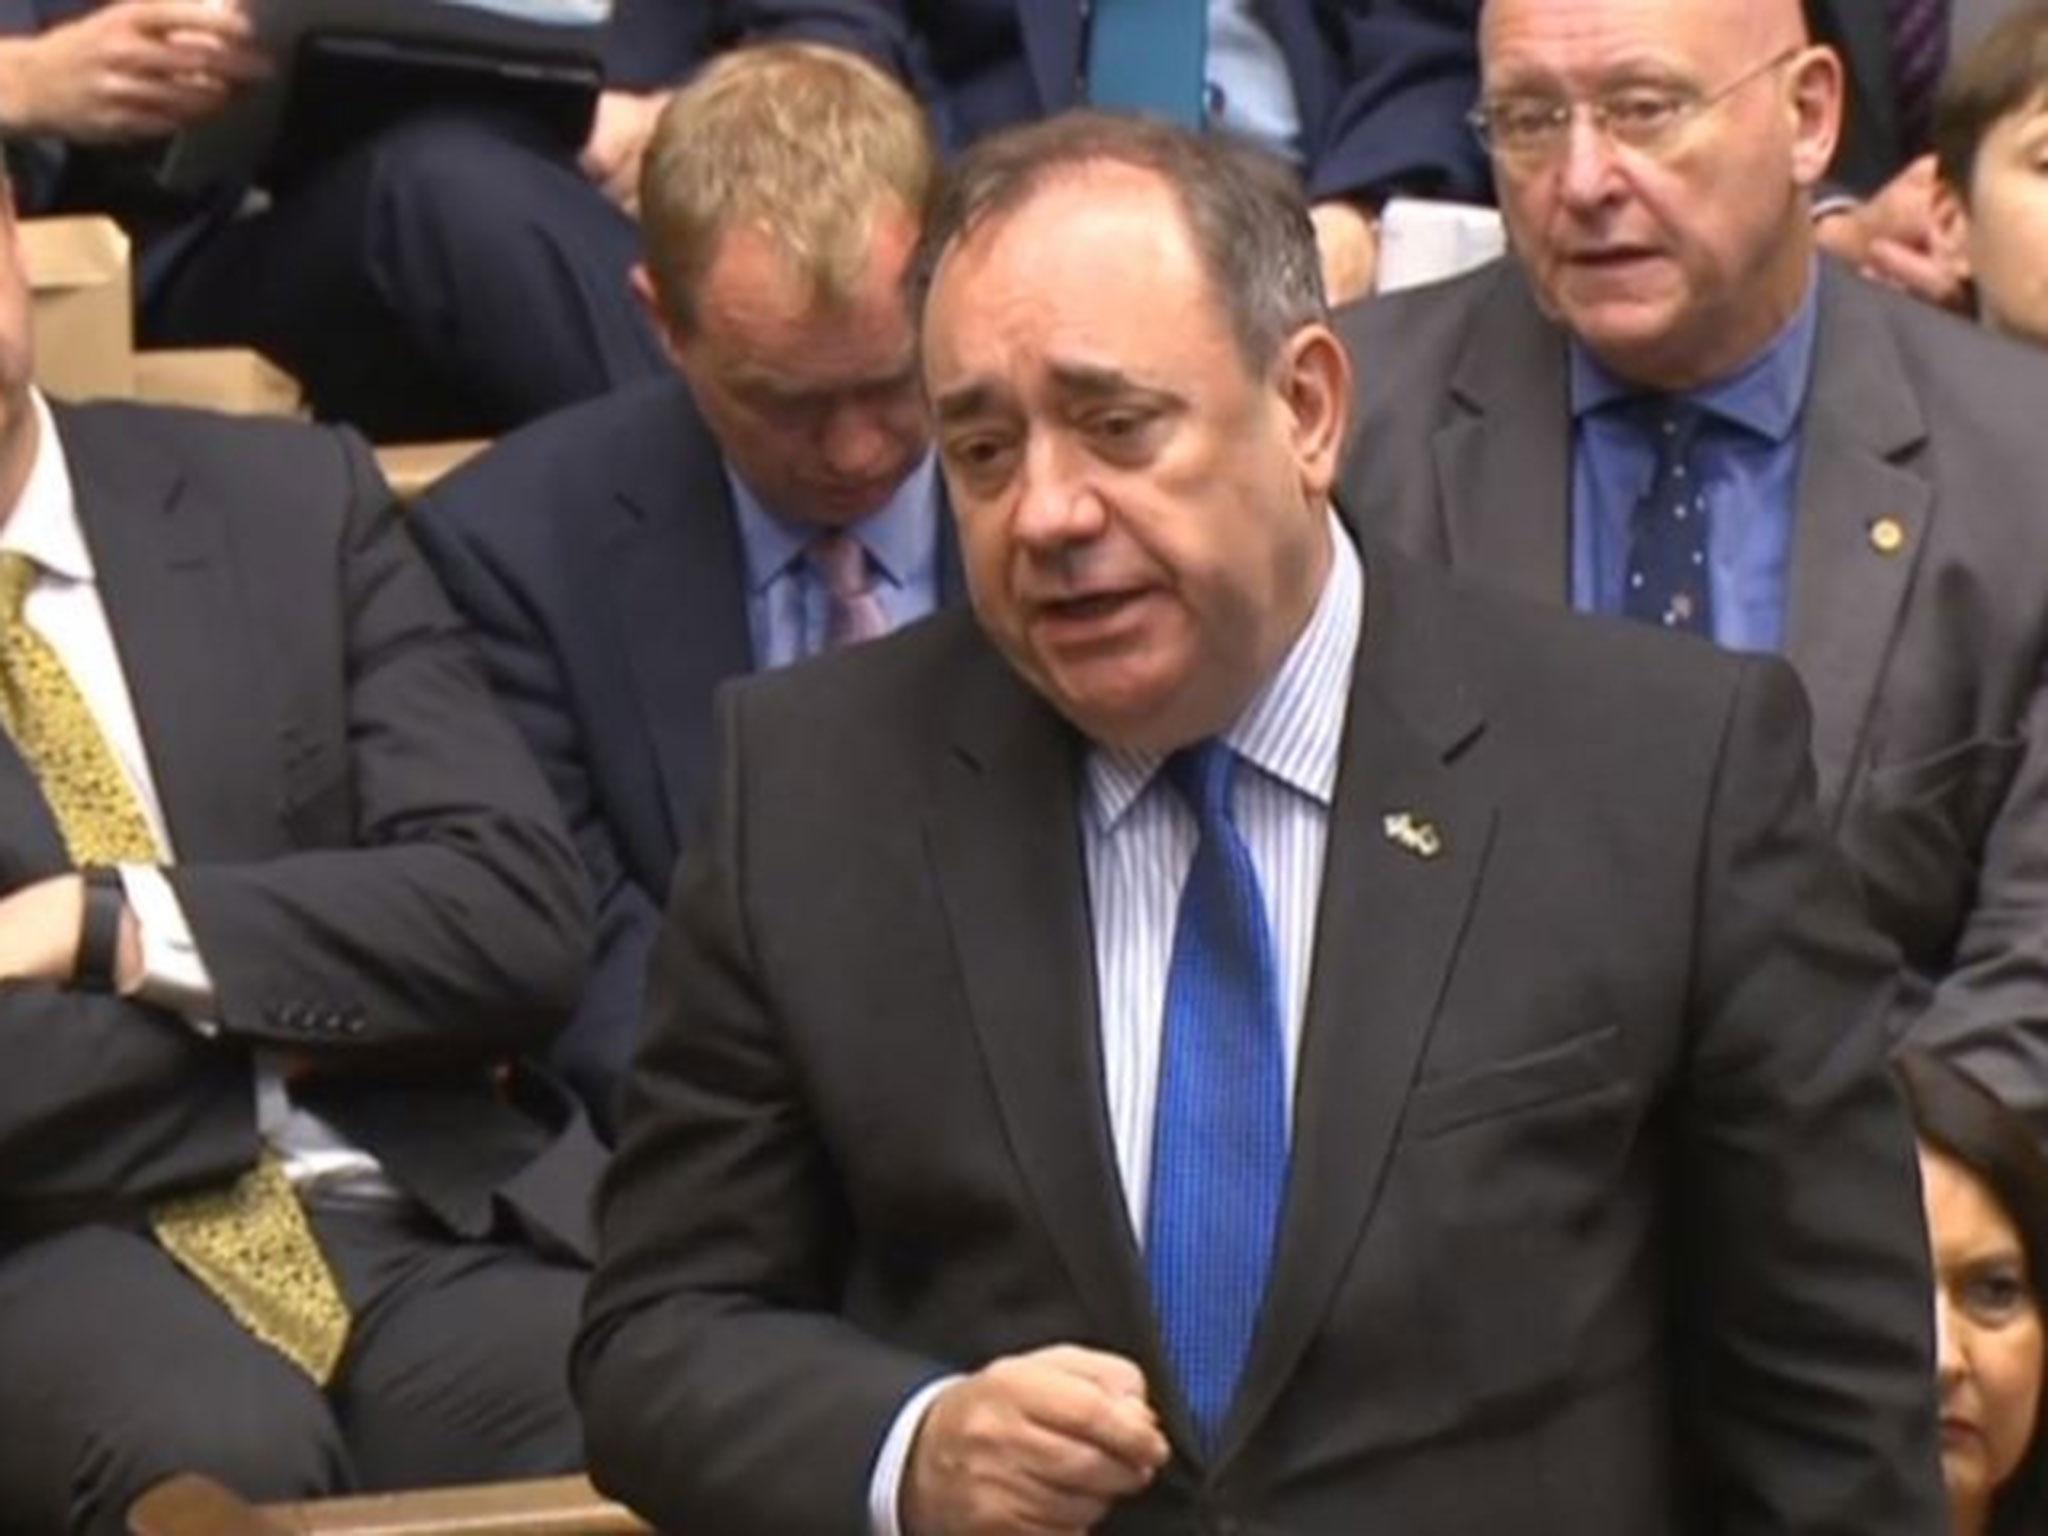 Former SNP leader Alex Salmond said earlier this year the report will show Tony Blair committed to the invasion of Iraq in private with President George Bush before 2003